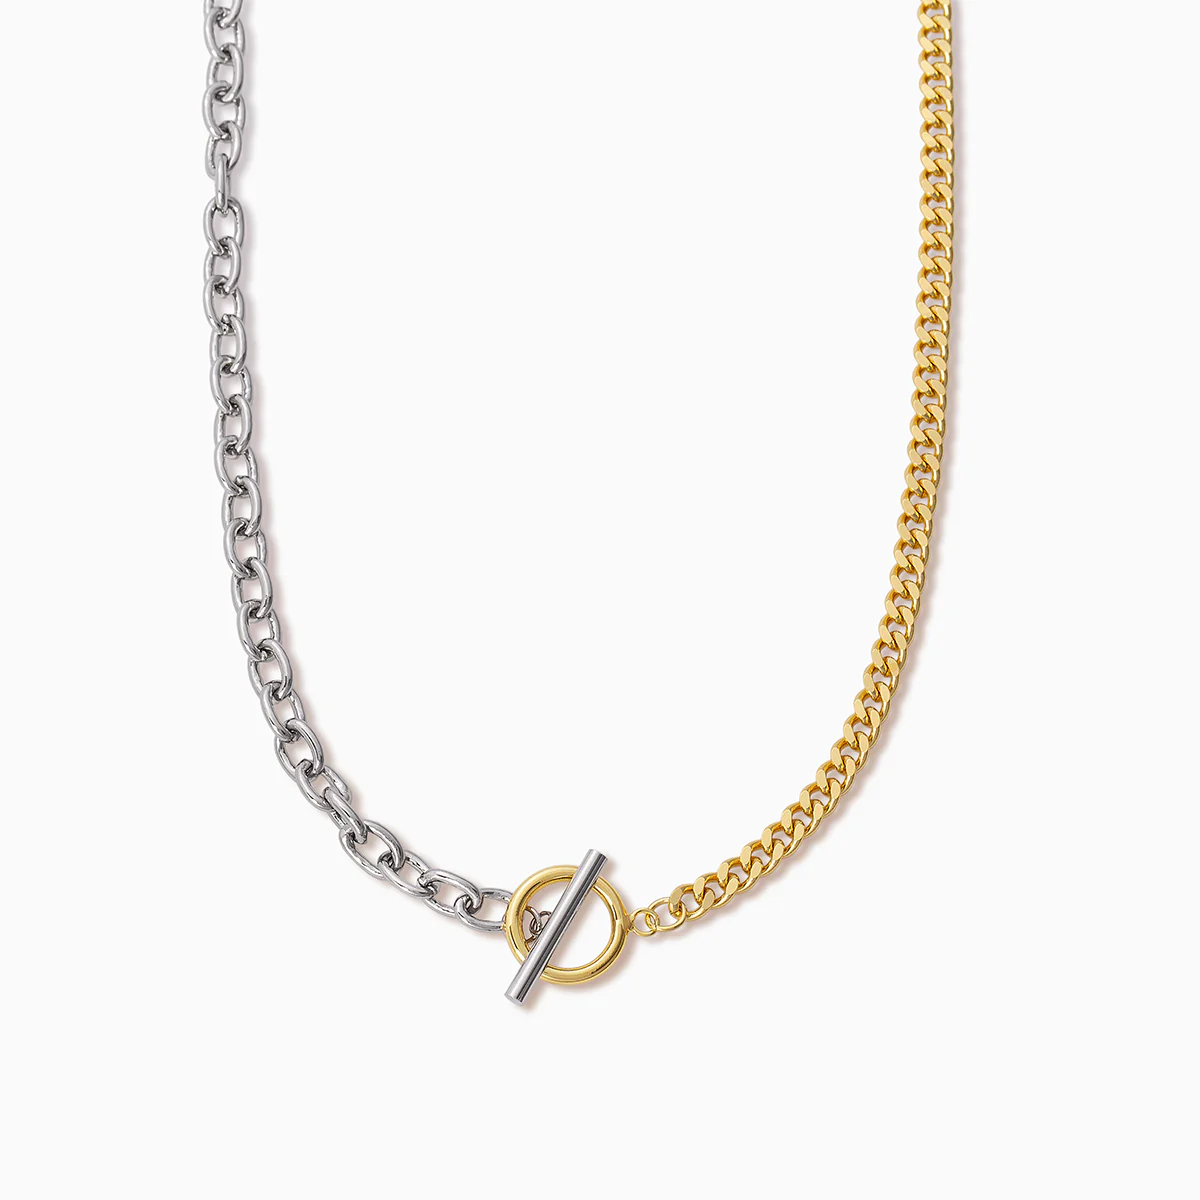 Pattern Gem and Chain Necklace in Gold | Uncommon James